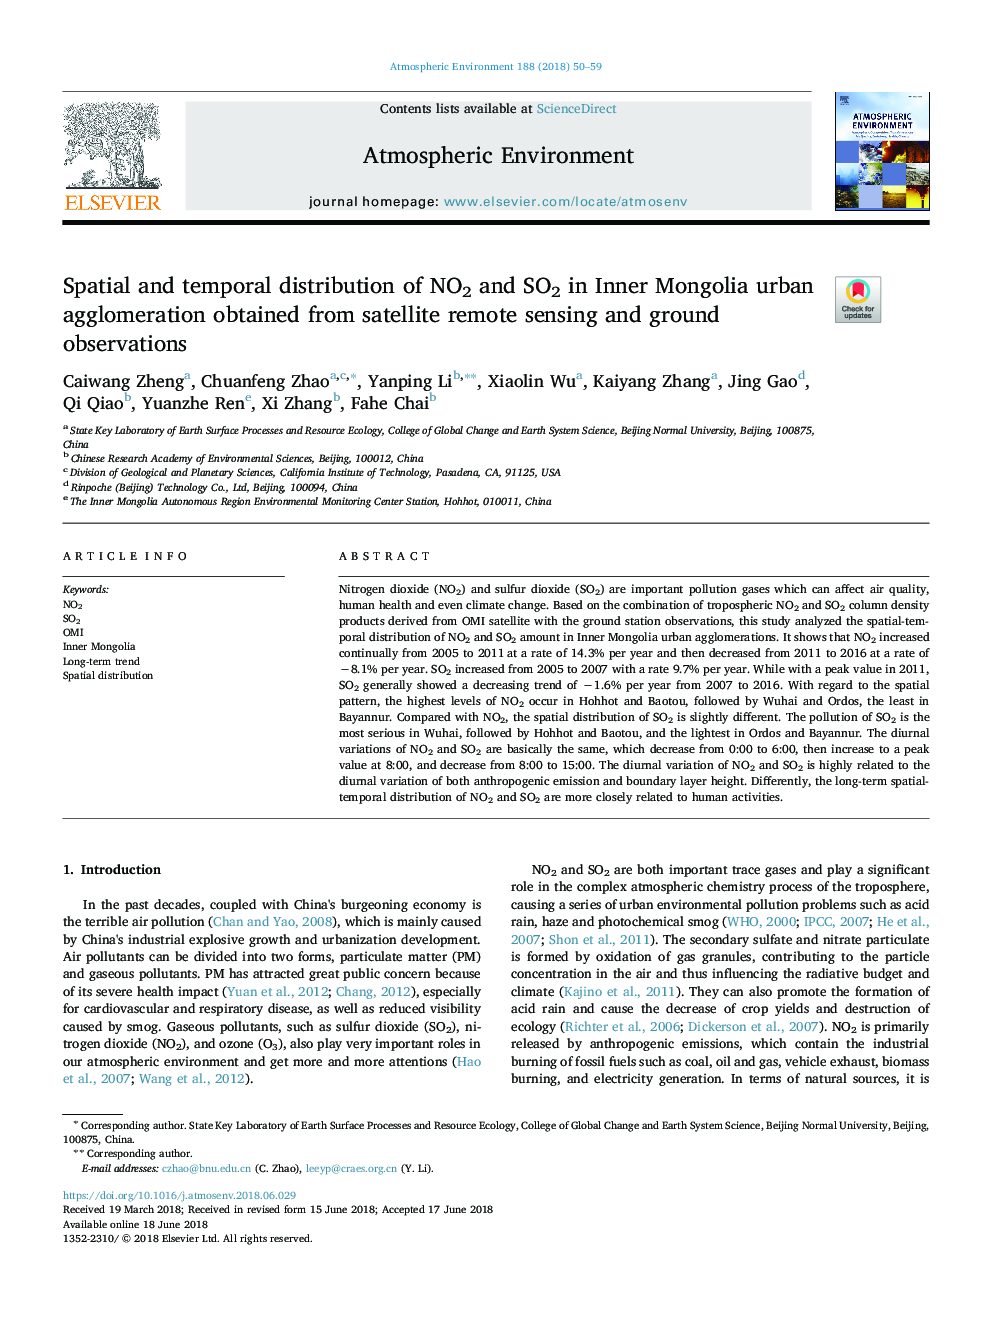 Spatial and temporal distribution of NO2 and SO2 in Inner Mongolia urban agglomeration obtained from satellite remote sensing and ground observations